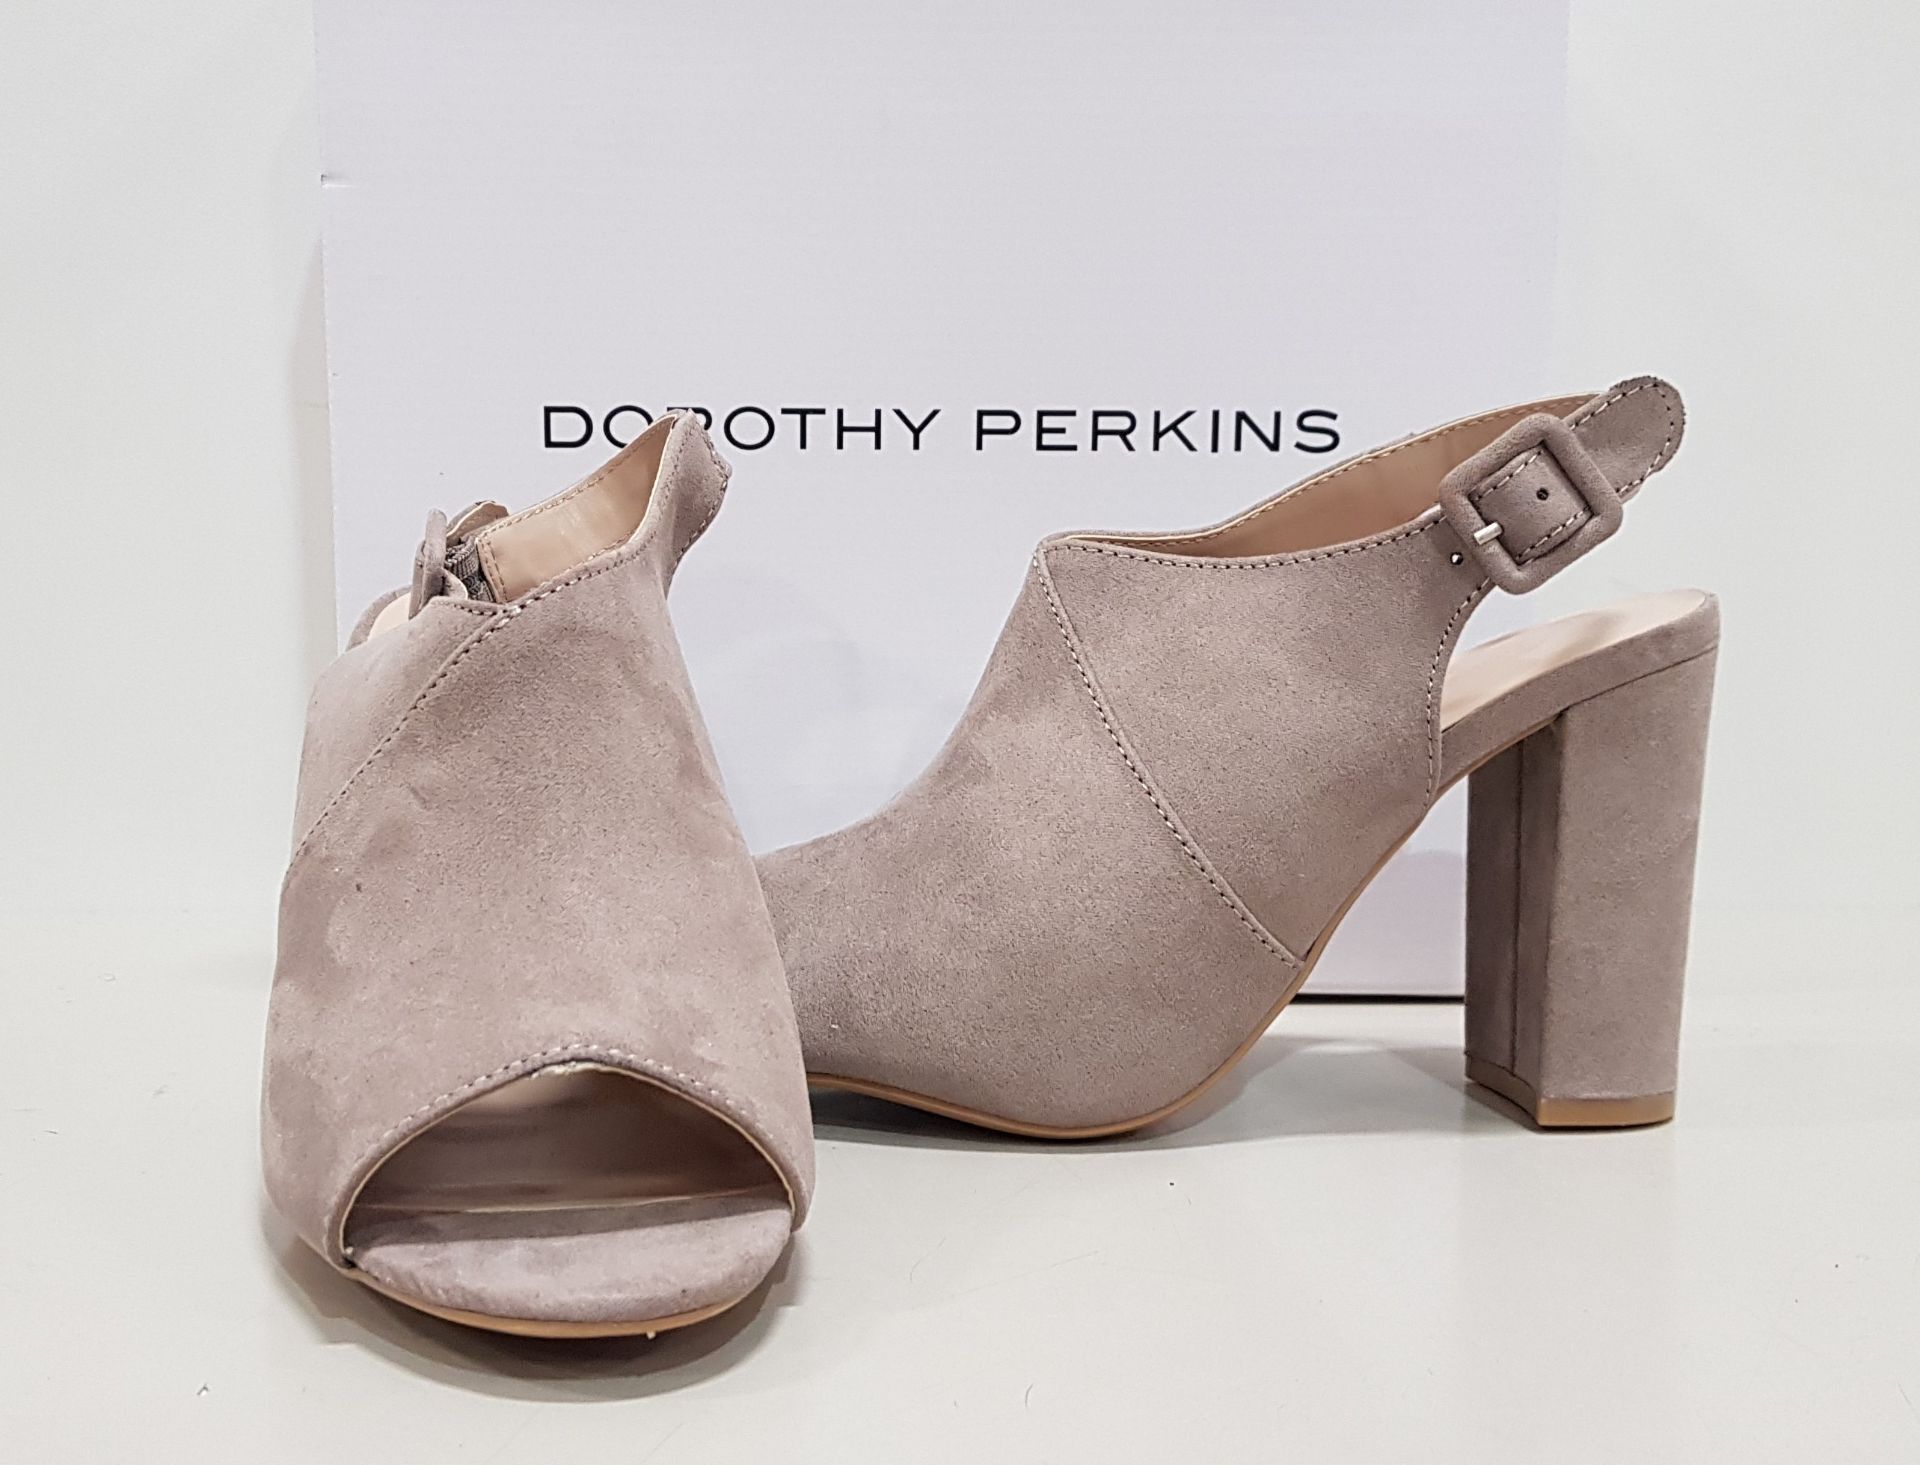 16 X BRAND NEW DOROTHY PERKINS SAVO TAUPE HEELED SANDALS - SIZE UK 4 - RRP £28.00 PAIR - TOTAL £384